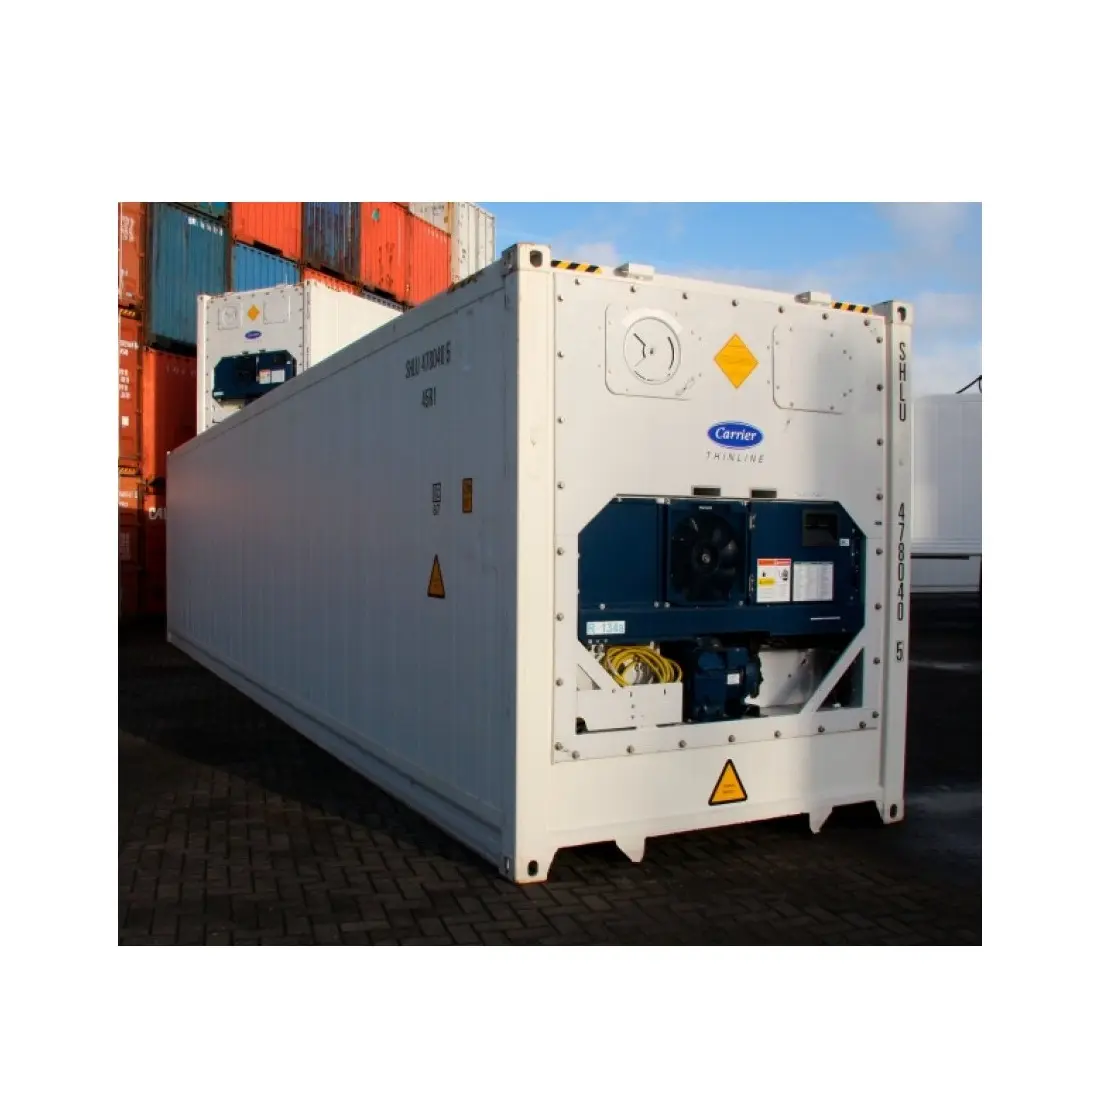 Wholesale Dealer and Supplier Of New and used Refrigerated Containers Best Quality Best Factory Price Bulk Buy Online